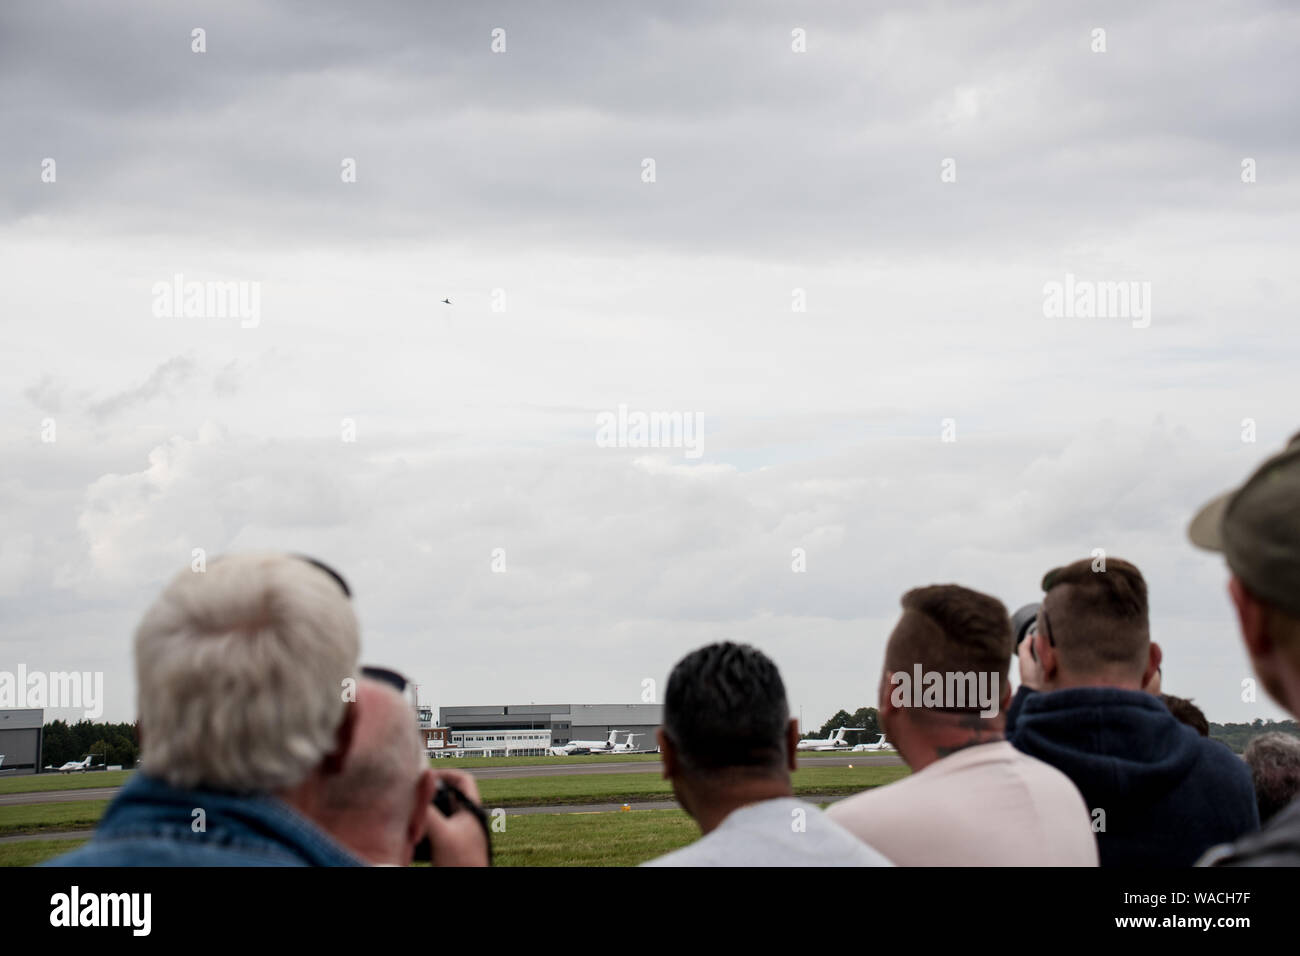 Spectators at a flying display watching and taking pictures (EDITORIAL USE ONLY) Stock Photo